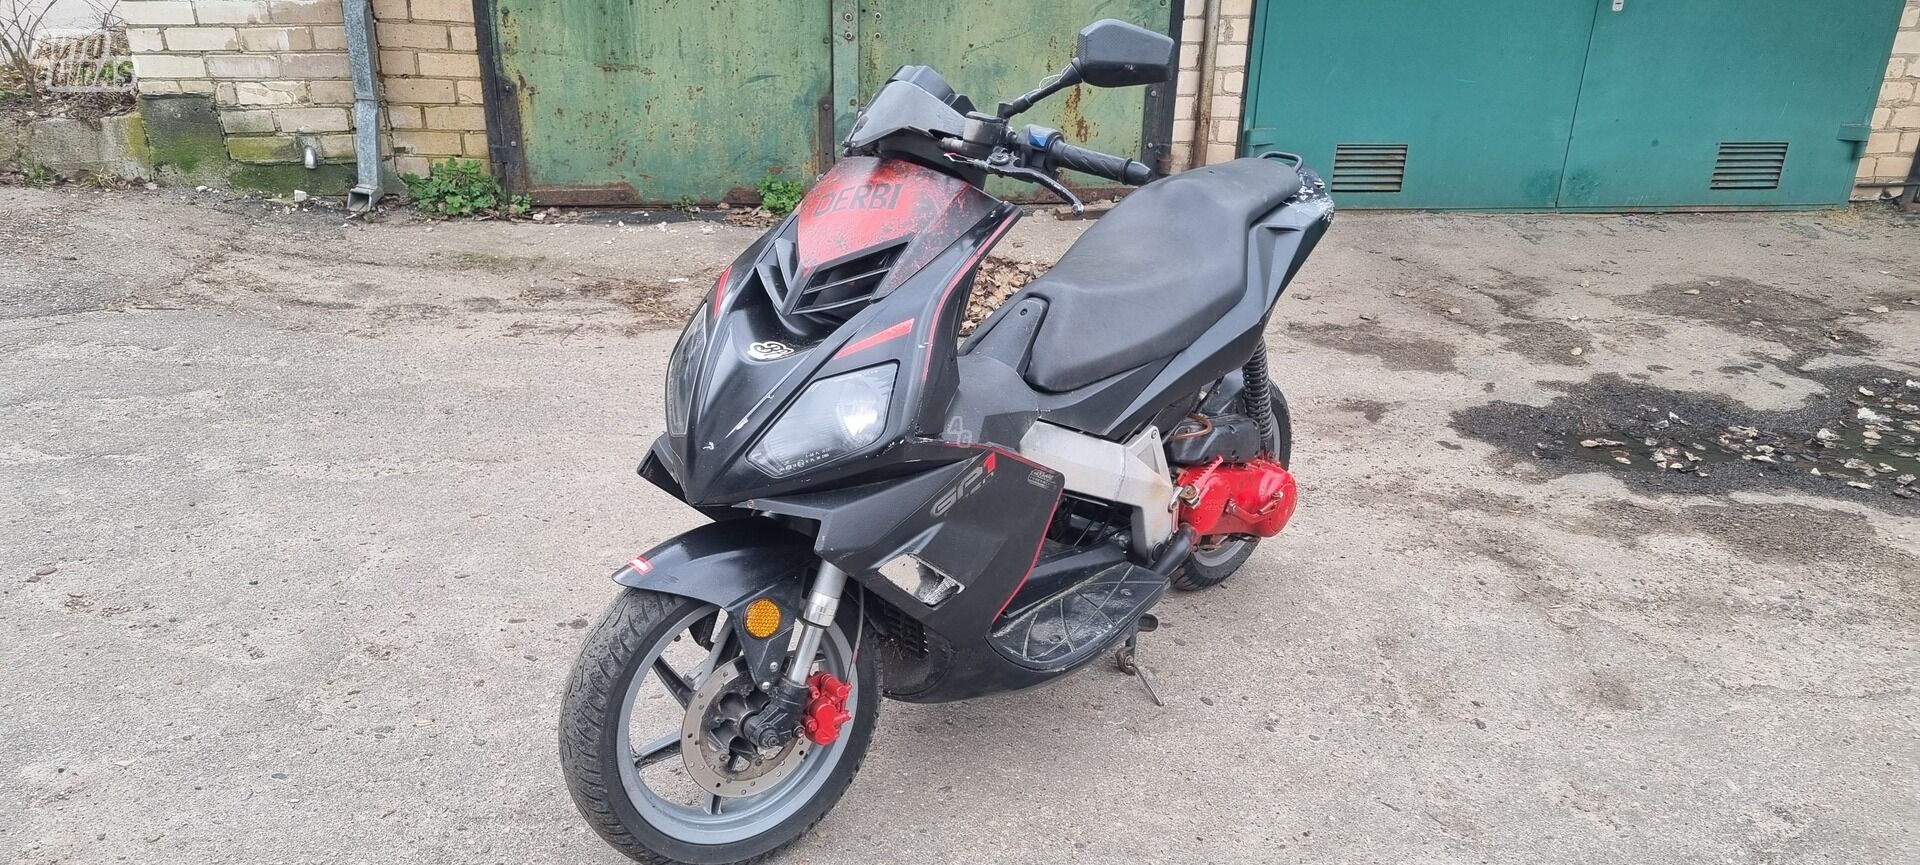 Derbi GP1 2008 y Scooter / moped